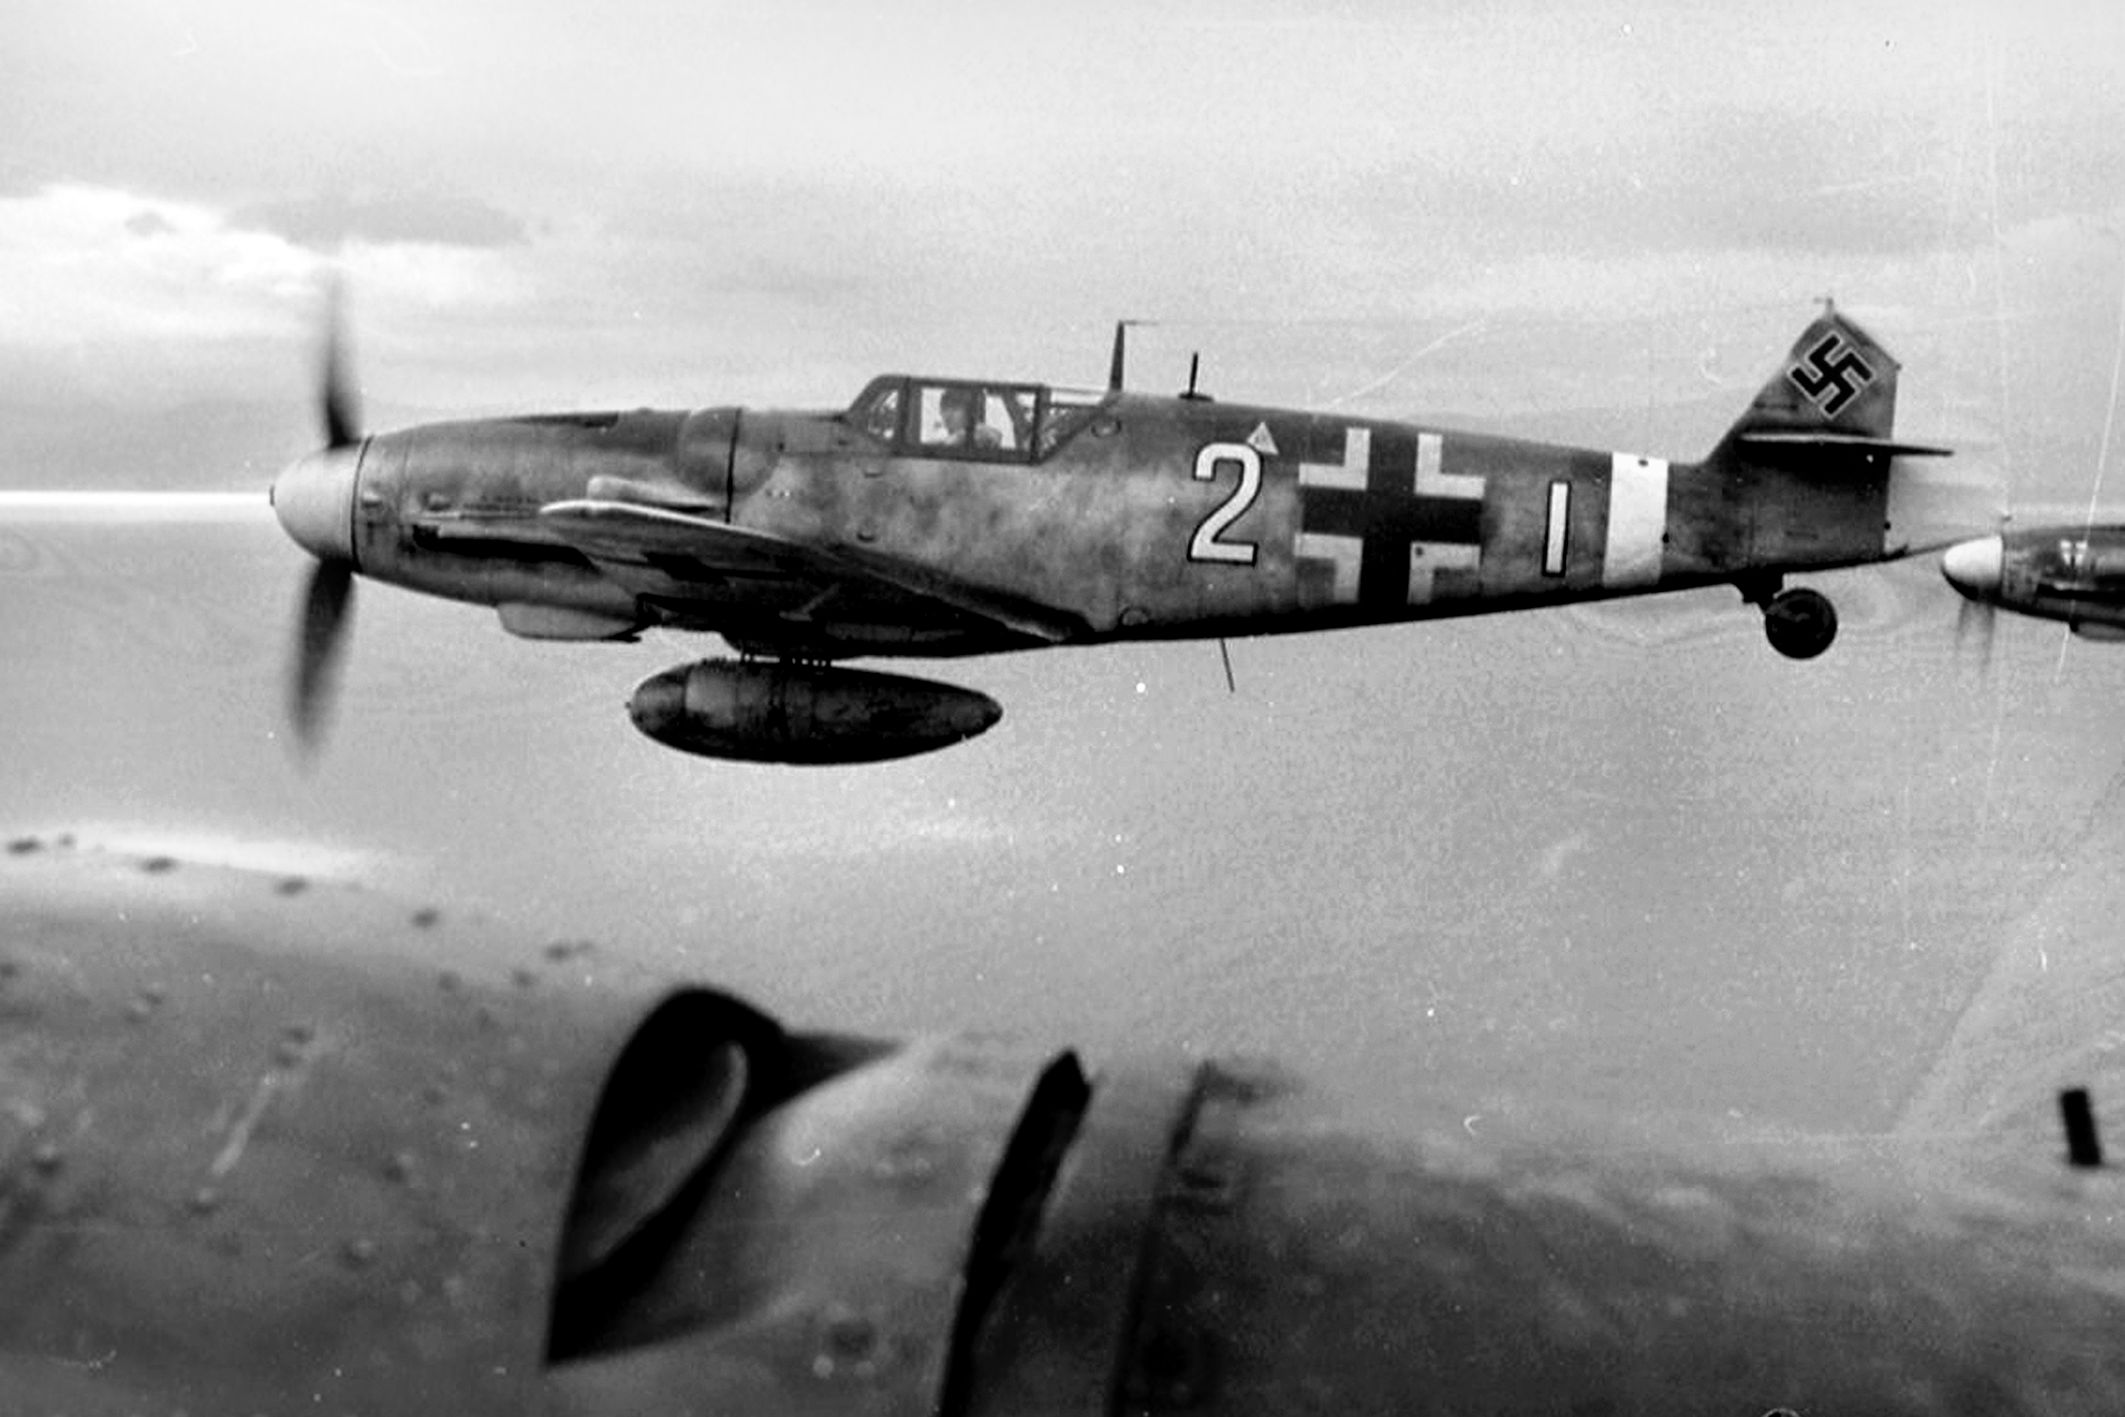 At 34,000, the Messerschmitt Bf 109 was the second most produced fighter during World War II, just behind the Russian llyushin Il-2 Shturmovik (36,000). Me/ Bf 109 variants made up about 28 percent of Germany’s Luftwaffe. Could be armed with two rifle caliber machine guns in the cowling, two 20mm cannon in the wings and sometimes a 15mm or 20mm cannon in the propeller hub.